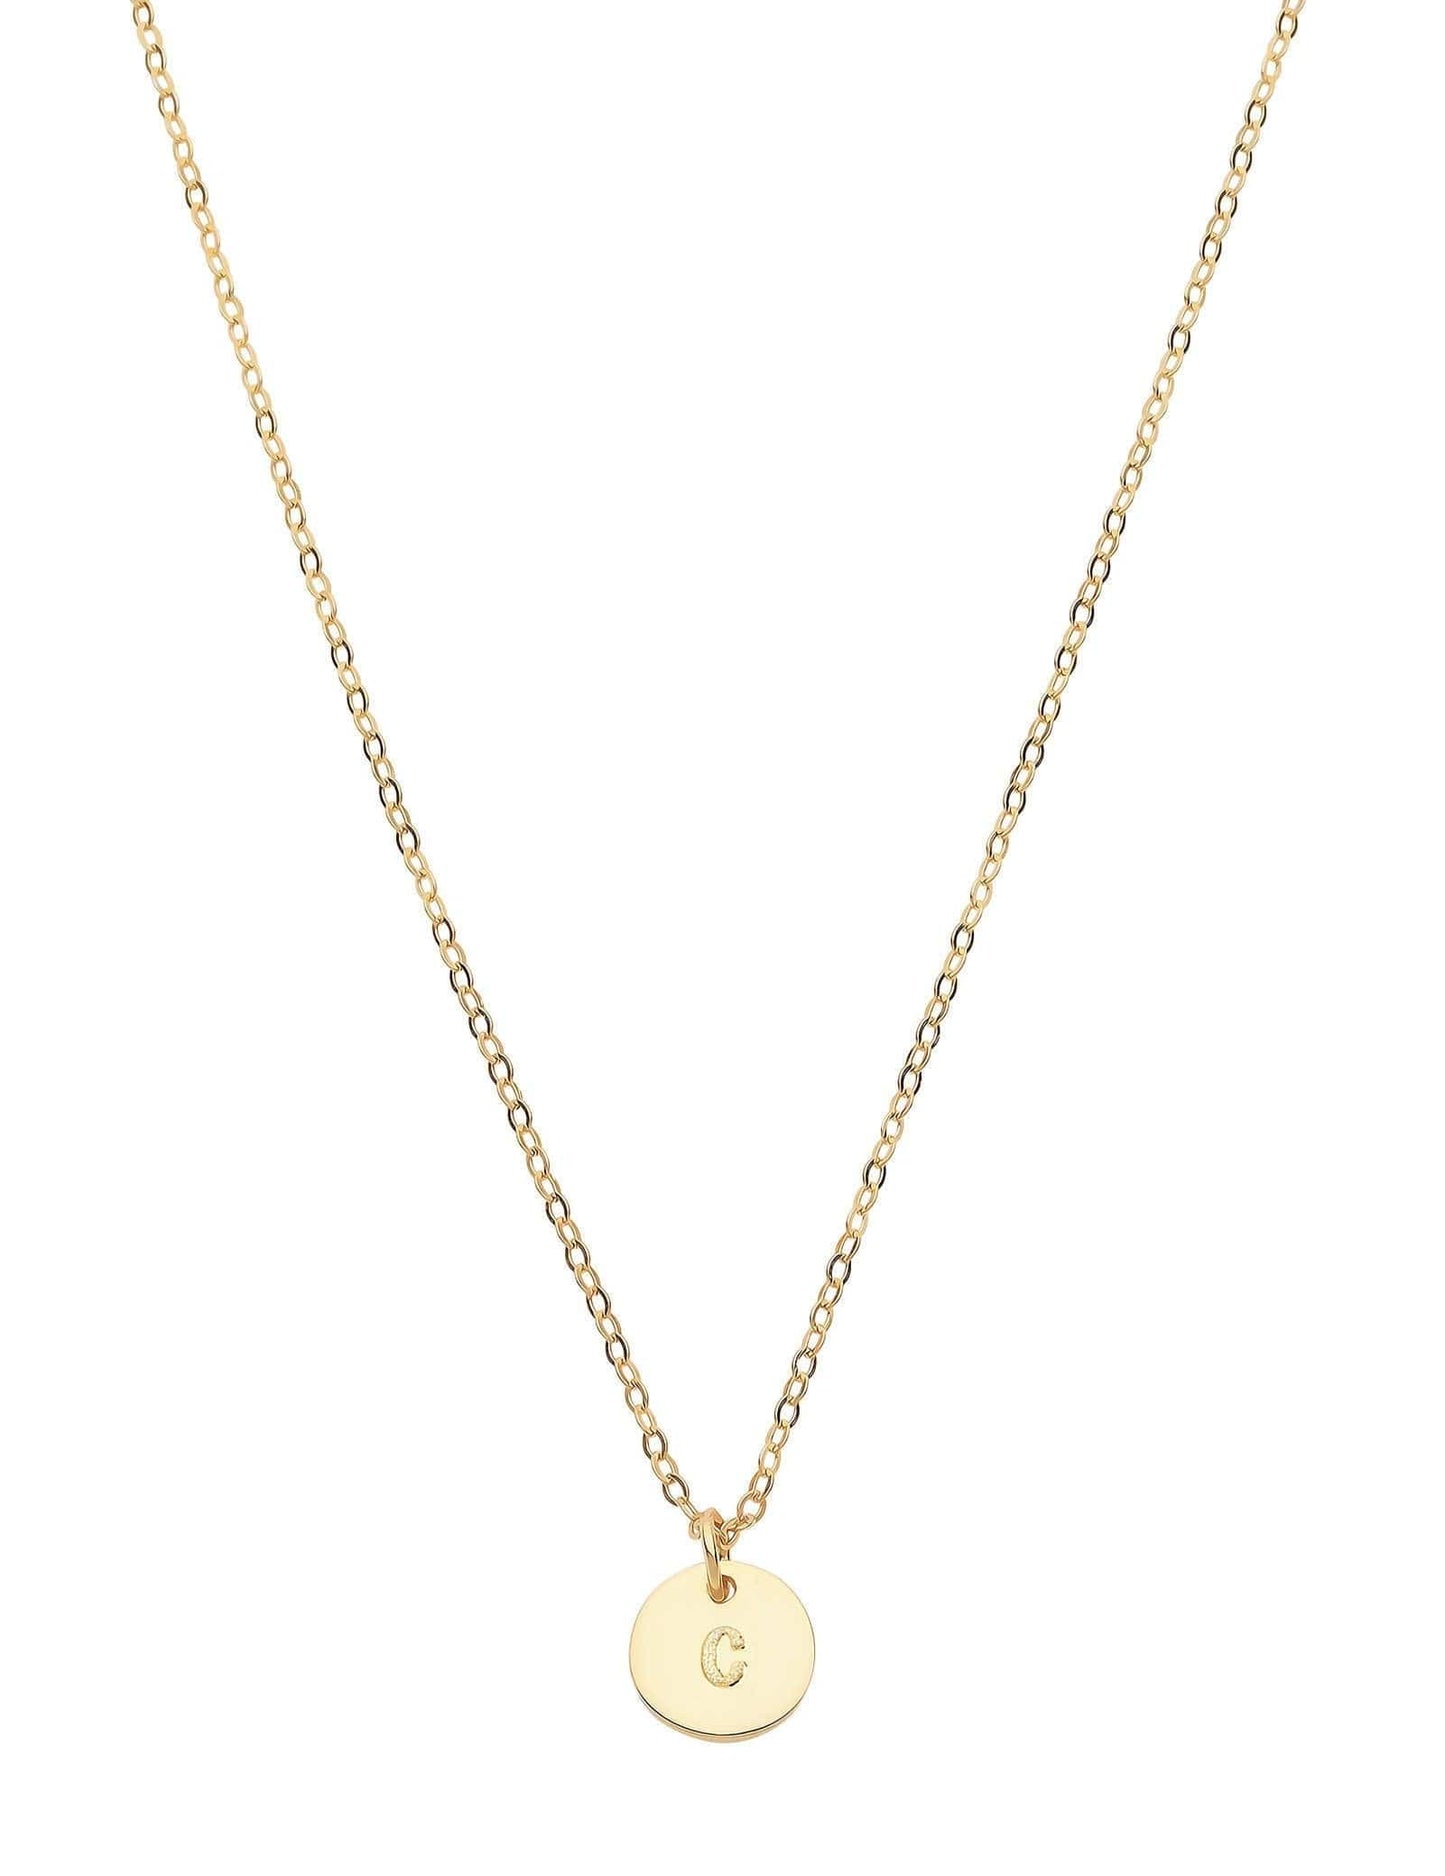 Dear Addison Yellow Gold Letter C Necklace